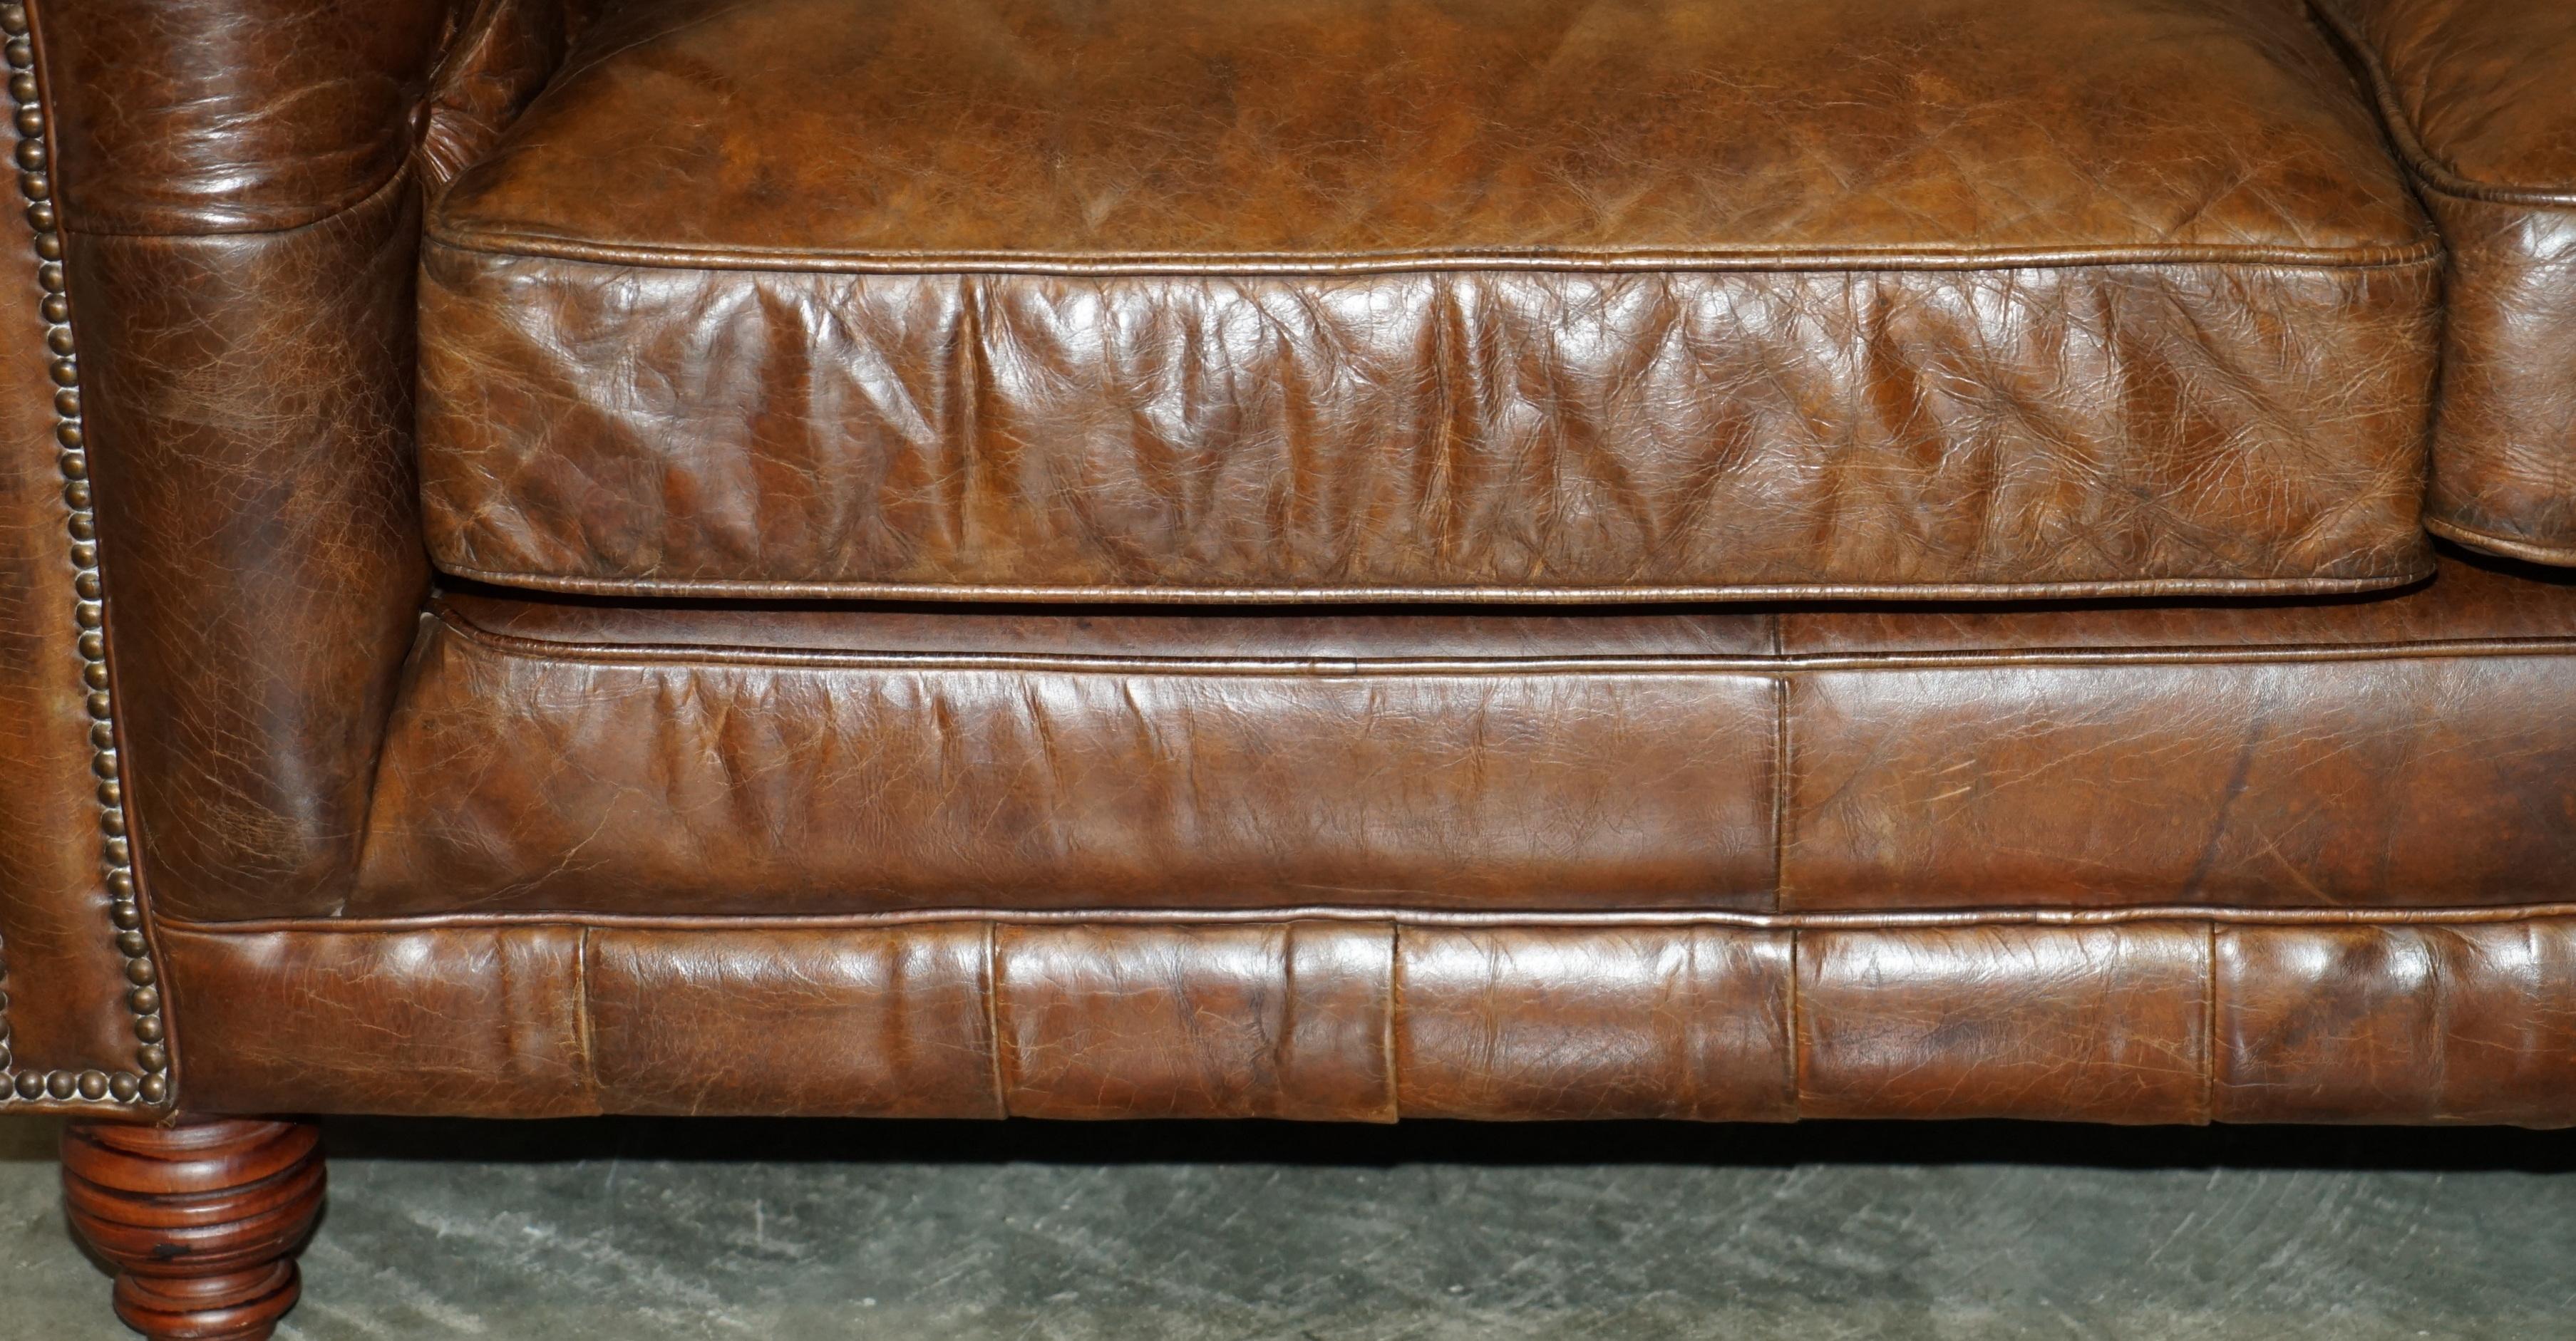 1 OF 2 TIMOTHY OULTON HERiTAGE BROWN VINTAGE LEATHER CHESTERFIELD HALO SOFAS For Sale 18